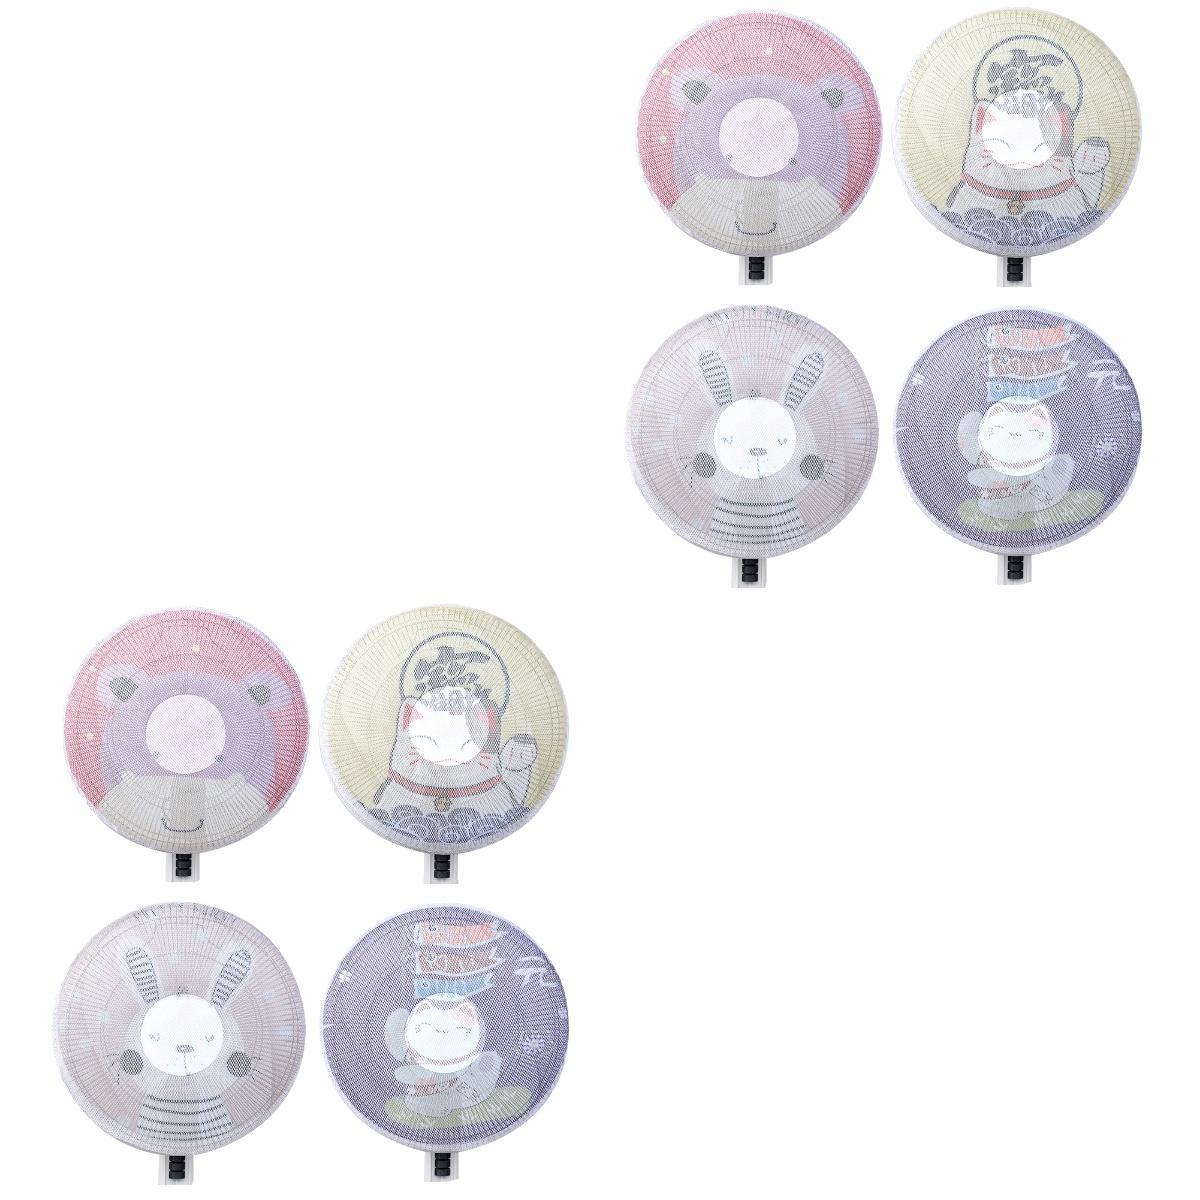 8 PCS Small Electric Fan Desk House Safety Cover Summer Floor Type Fans Home Child